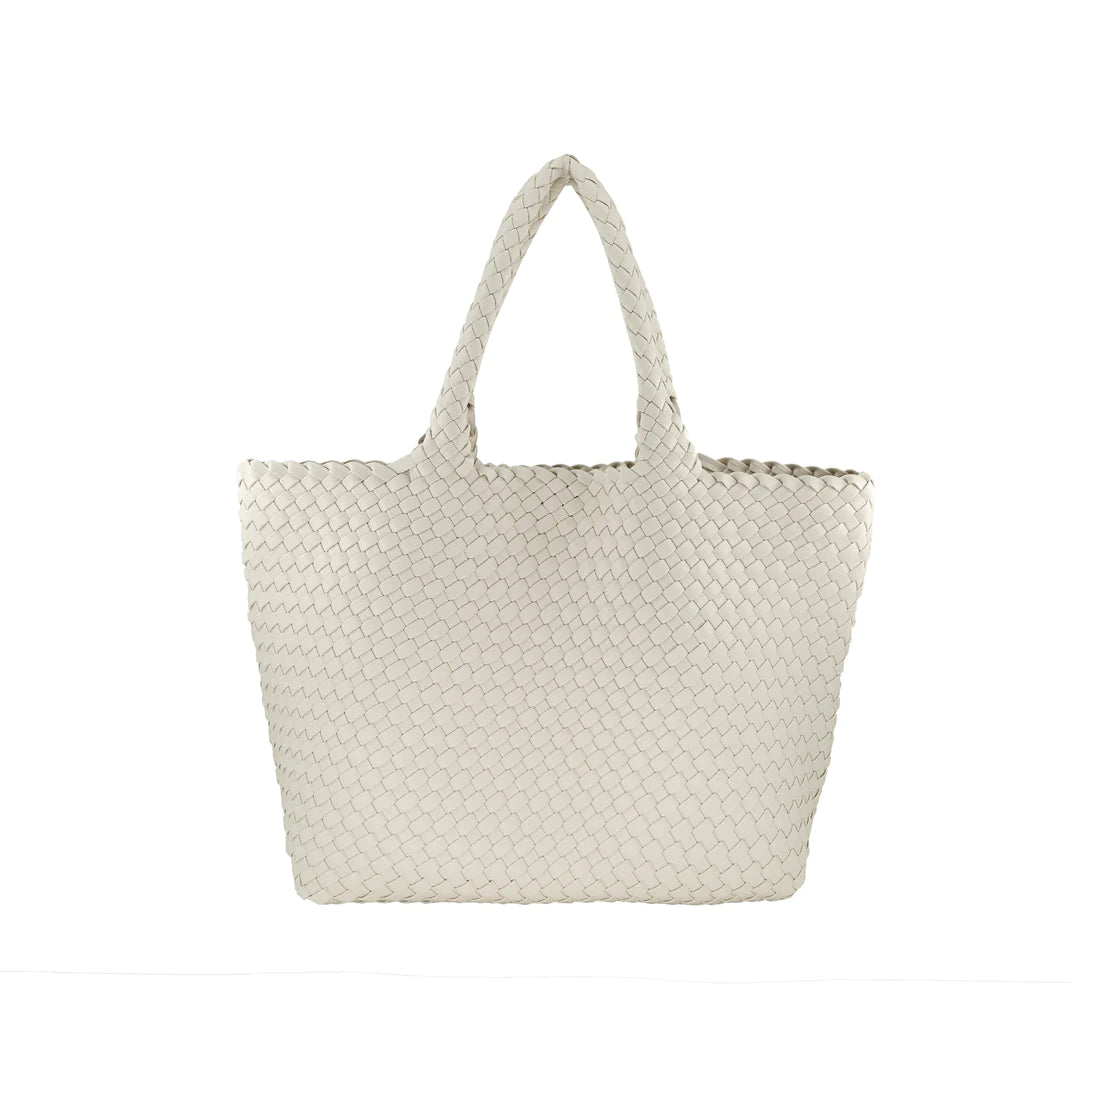 Stick With Me Woven Tote